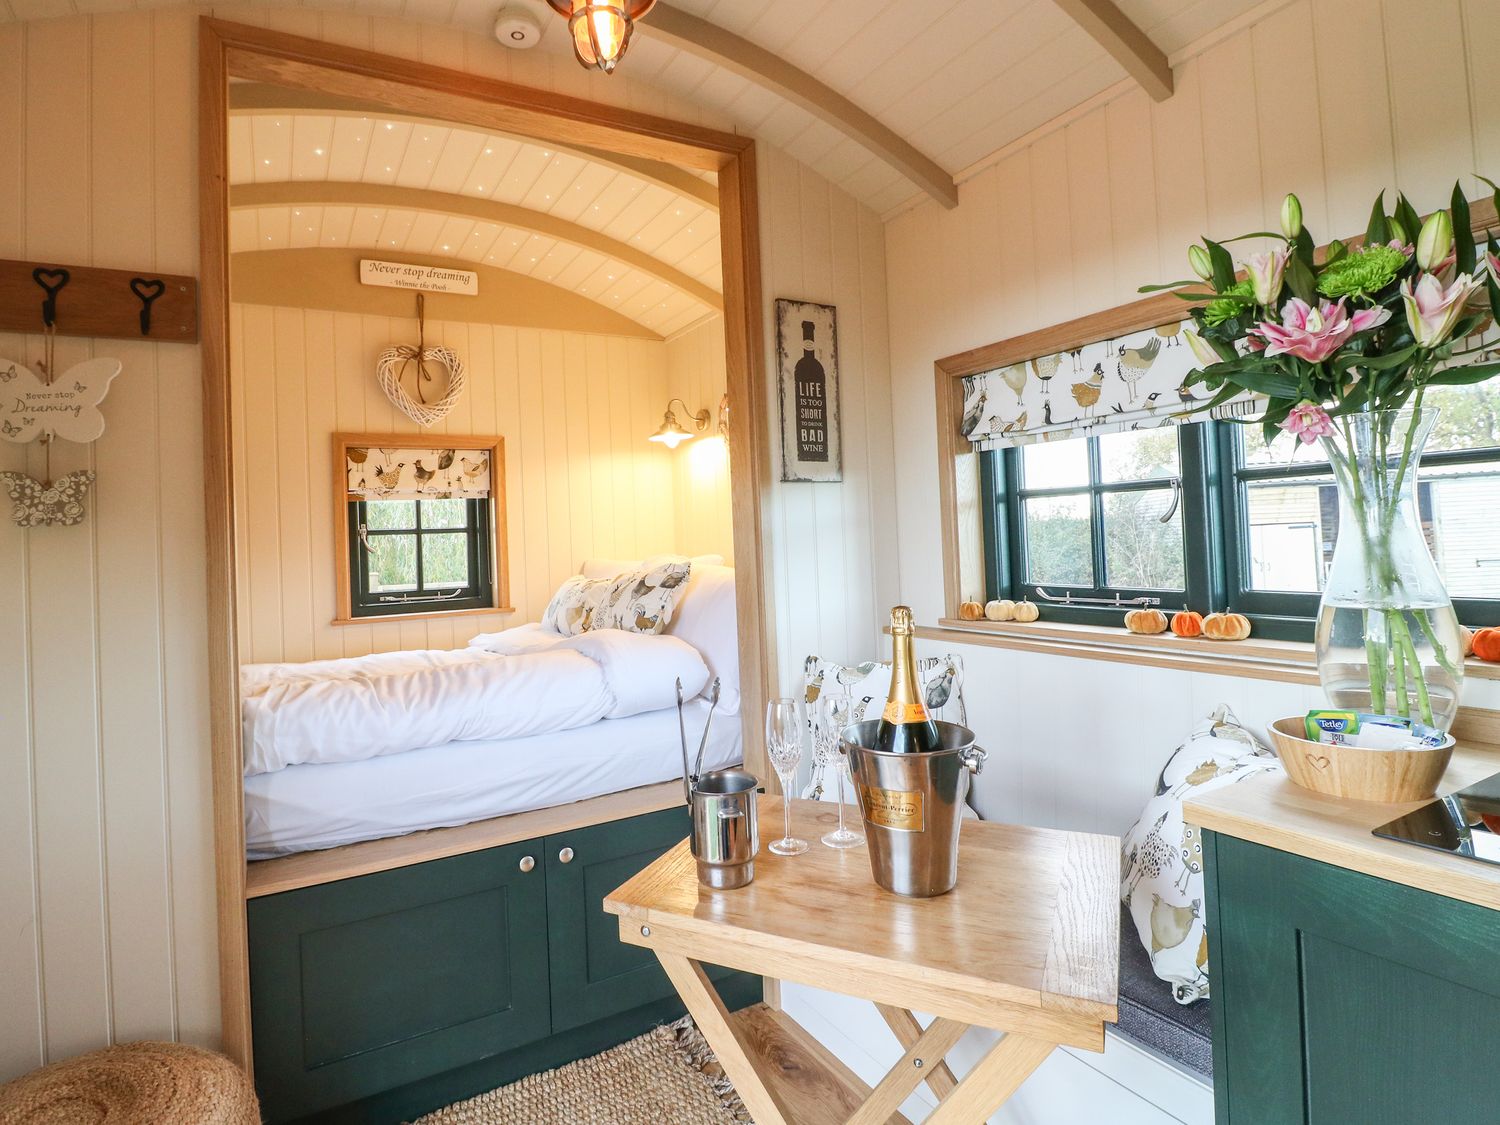 Poppie's Shepherds Hut in Bottesford, Leicestershire. Woodburning stove. Hot tub. Fire pit. Romantic